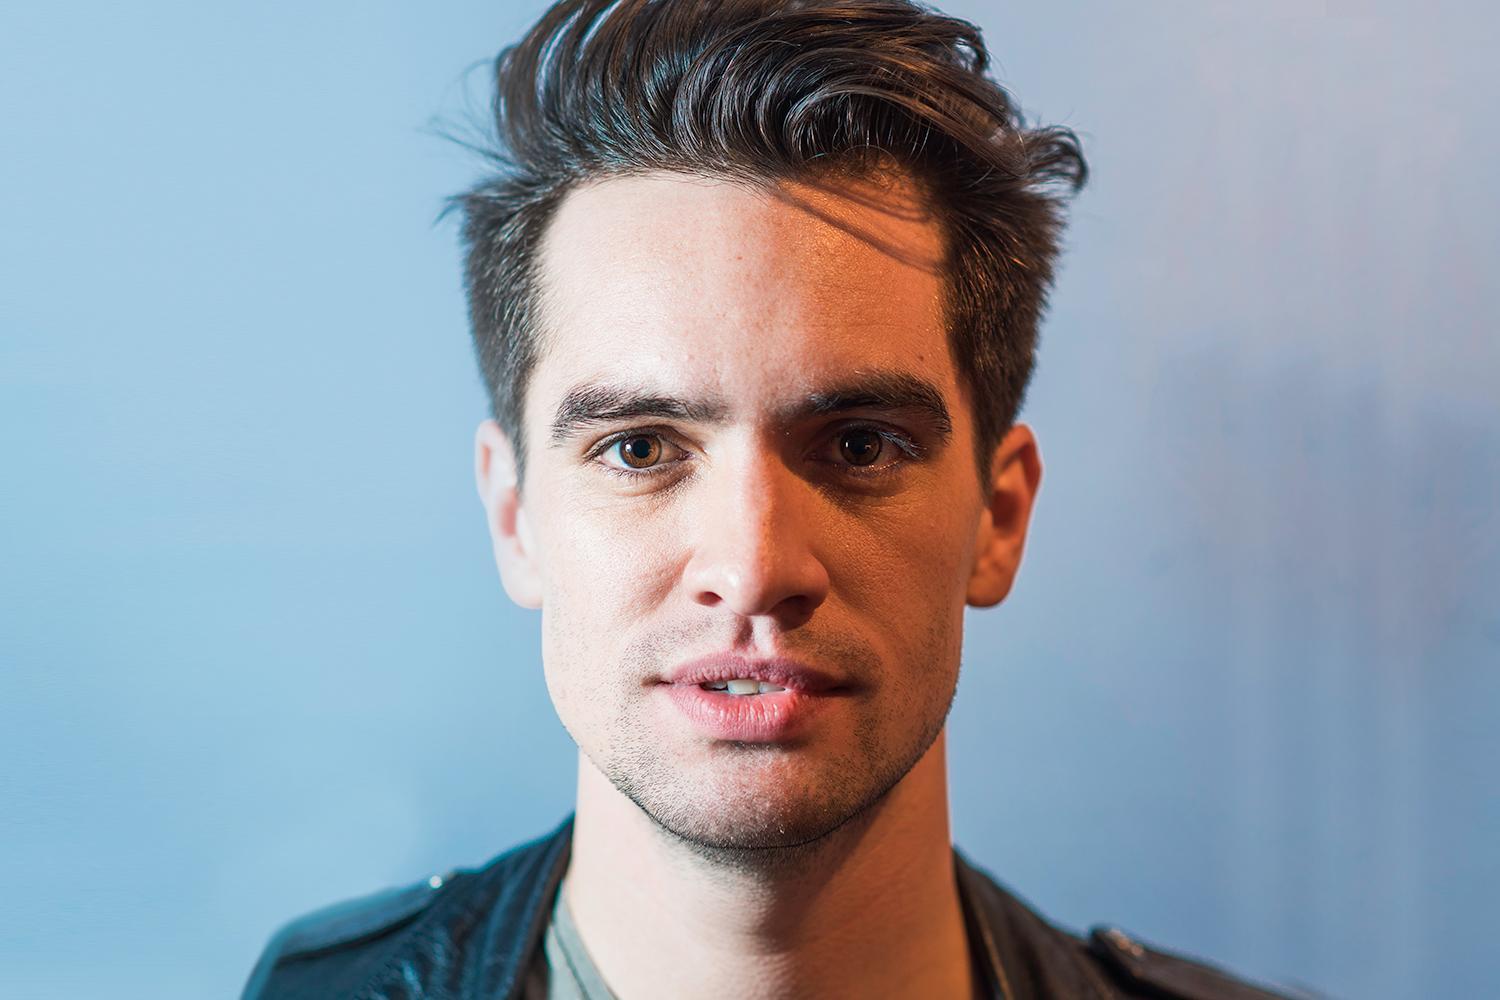 7. Brendon Urie - wide 3